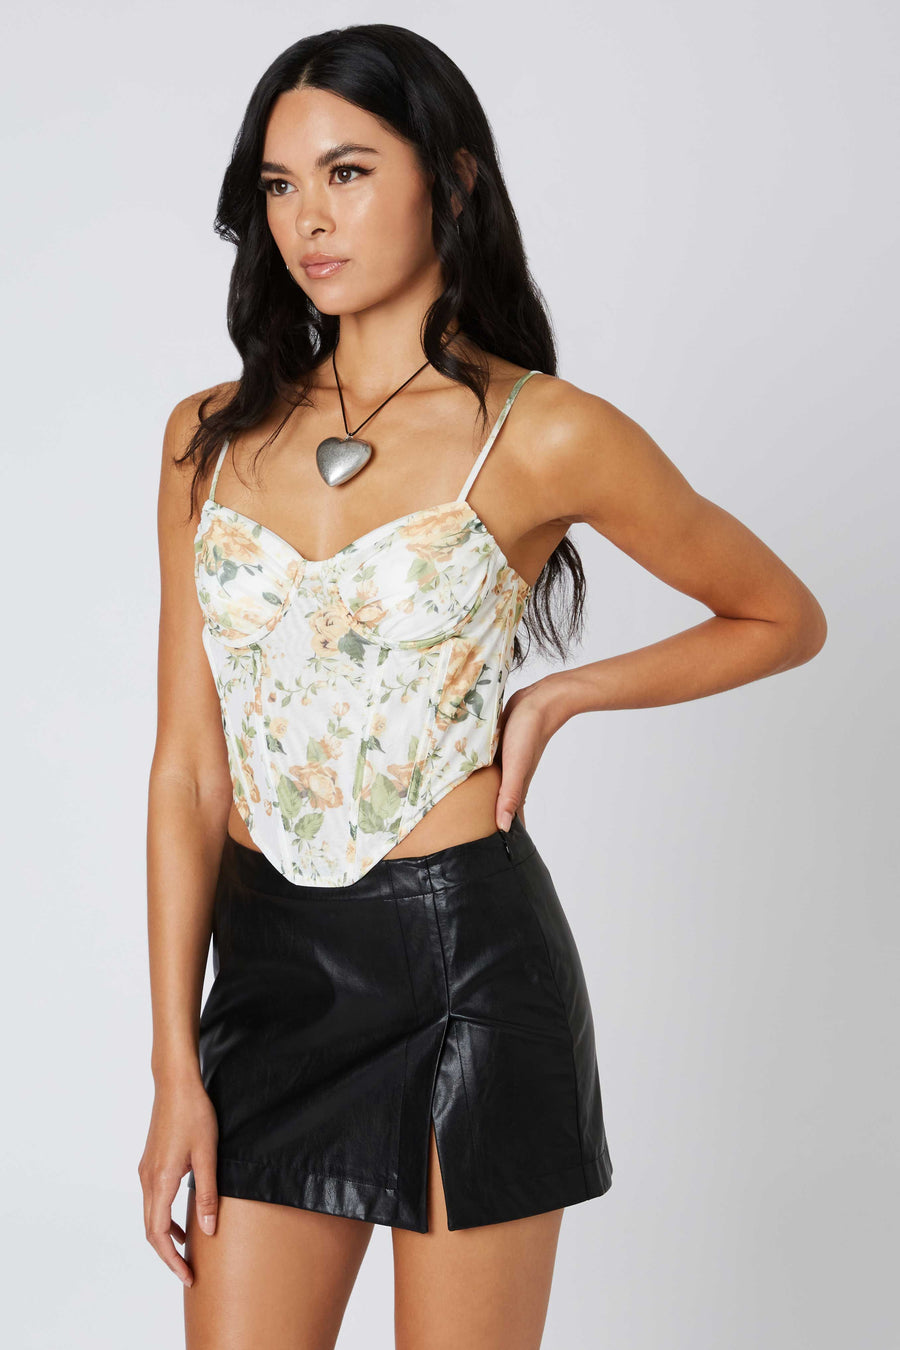 Corset style top with mesh fabric and floral pattern.